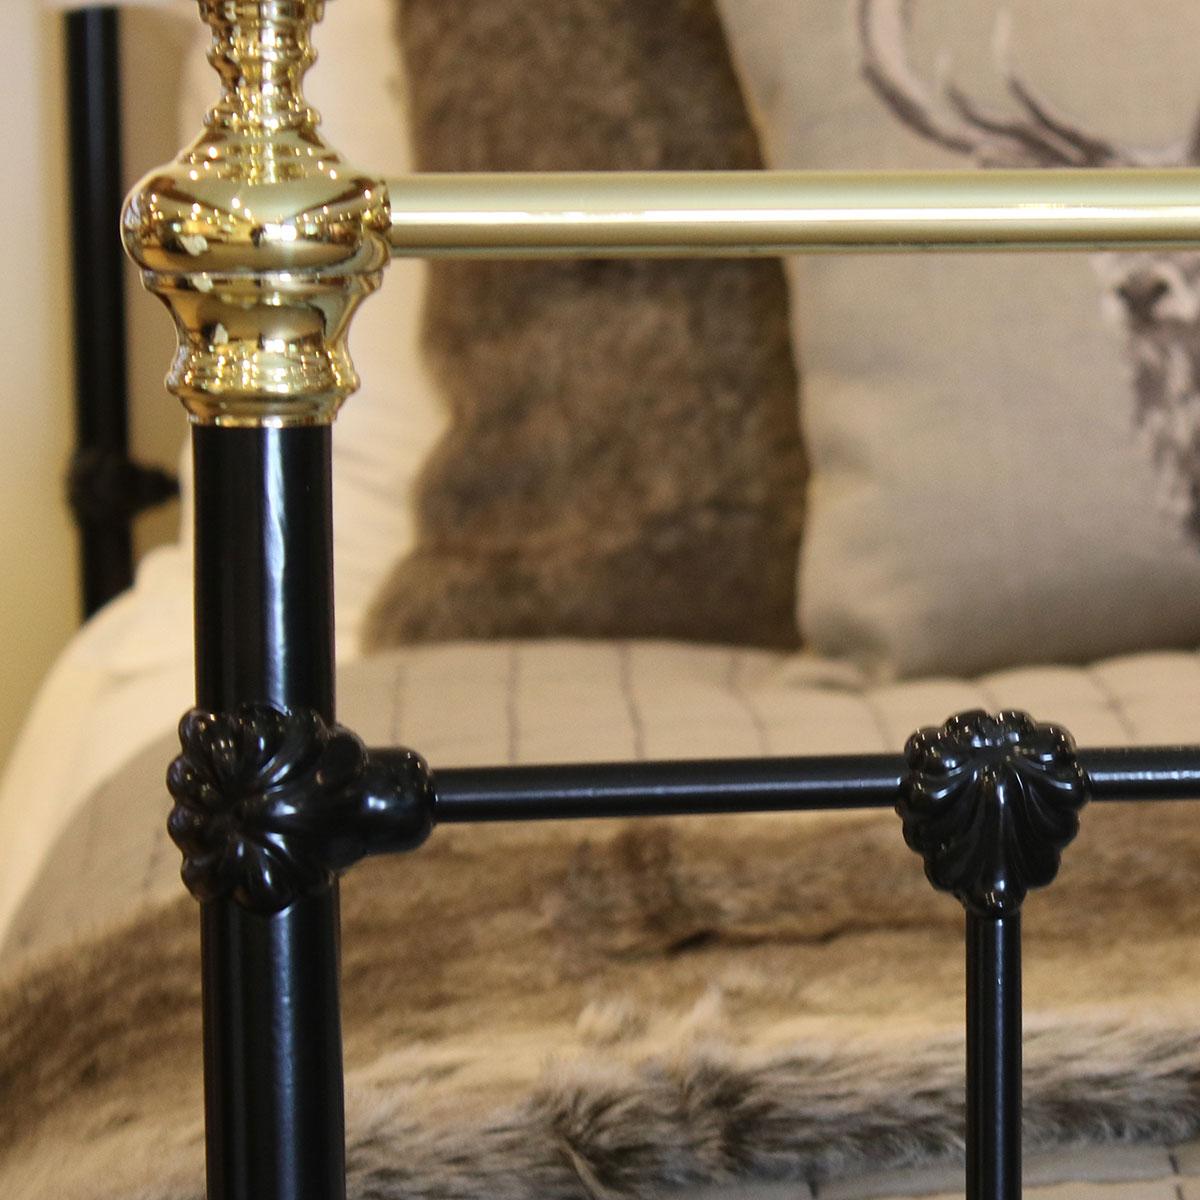 A black antique bed in brass and iron with straight brass top-rail, down bars and knobs.

This bed accepts a British King Size or American Queen Size (5ft wide, 60 inches or 150cm) base and mattress set.

The price is for the bed frame alone.